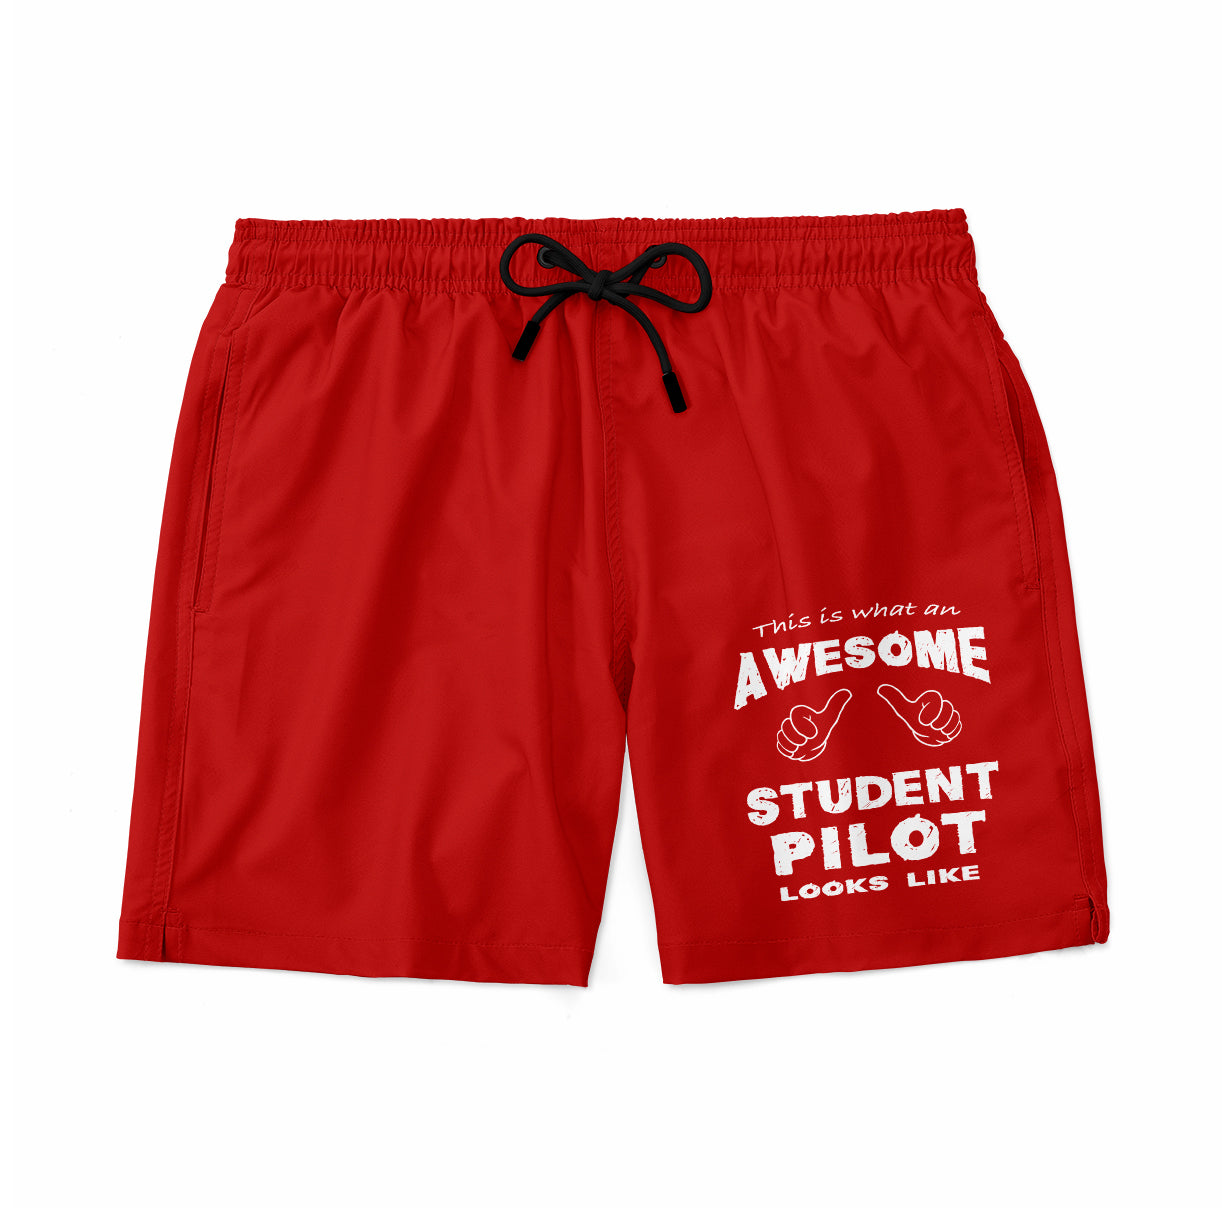 This is What an Awesome Student Pilot Look Like Swim Trunks & Shorts